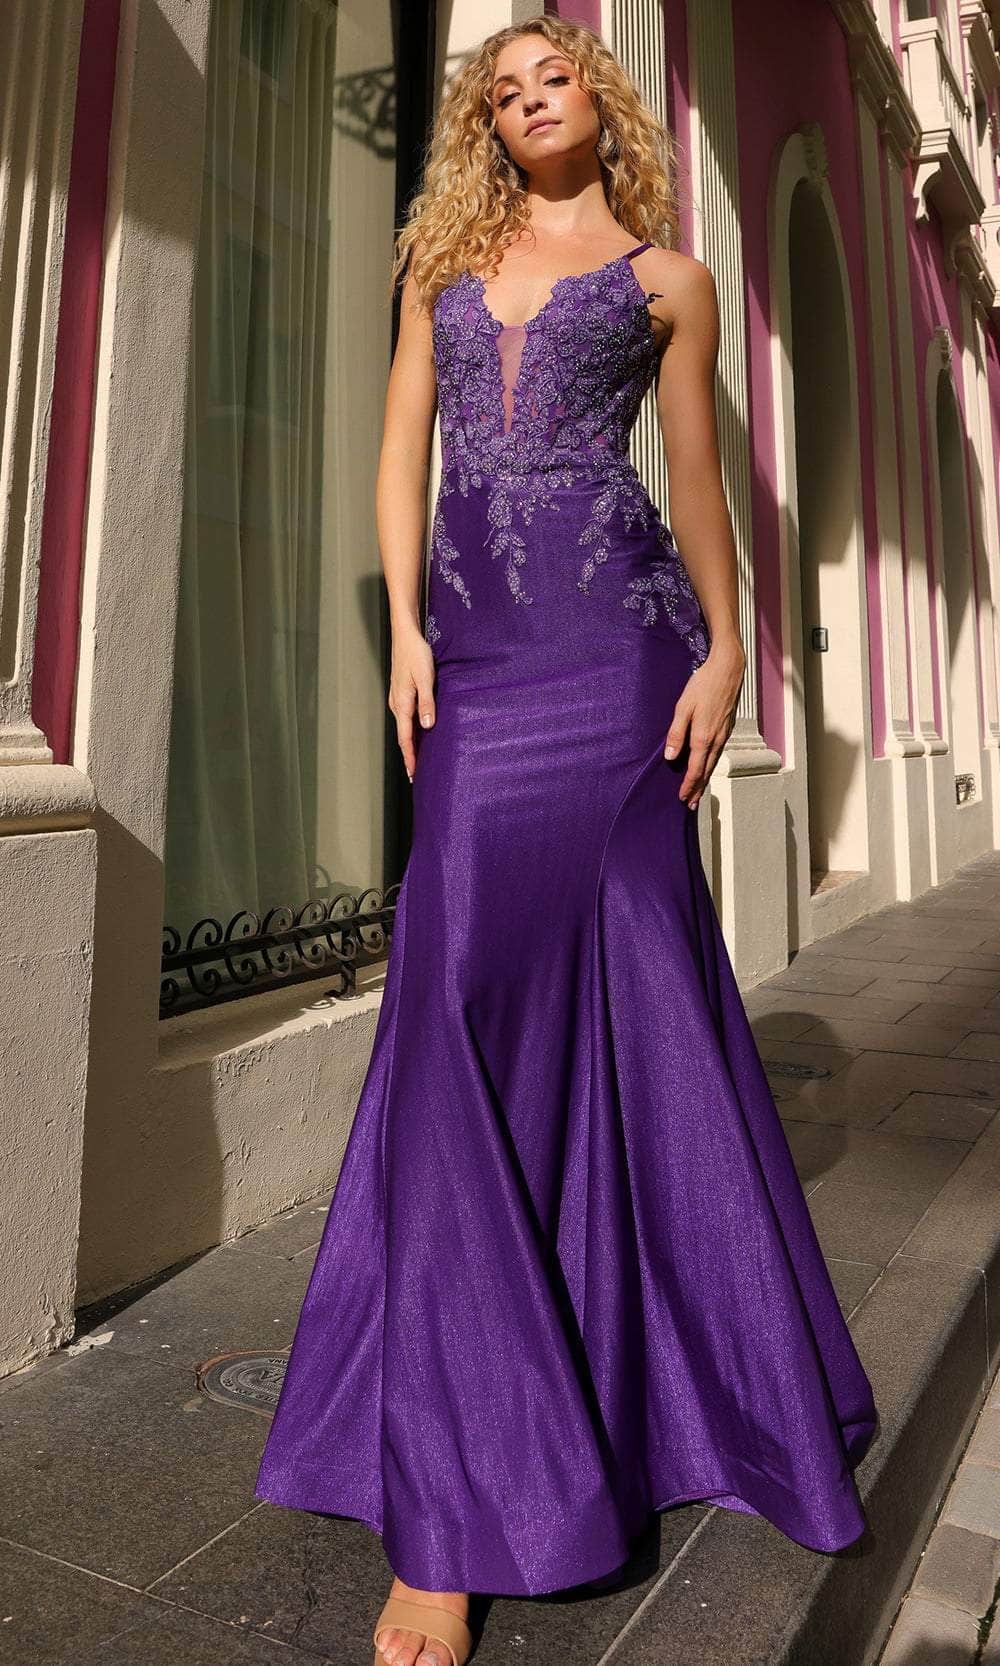 Nox Anabel G1364 - Trailing Lace Prom Dress Special Occasion Dress 0 / Plum